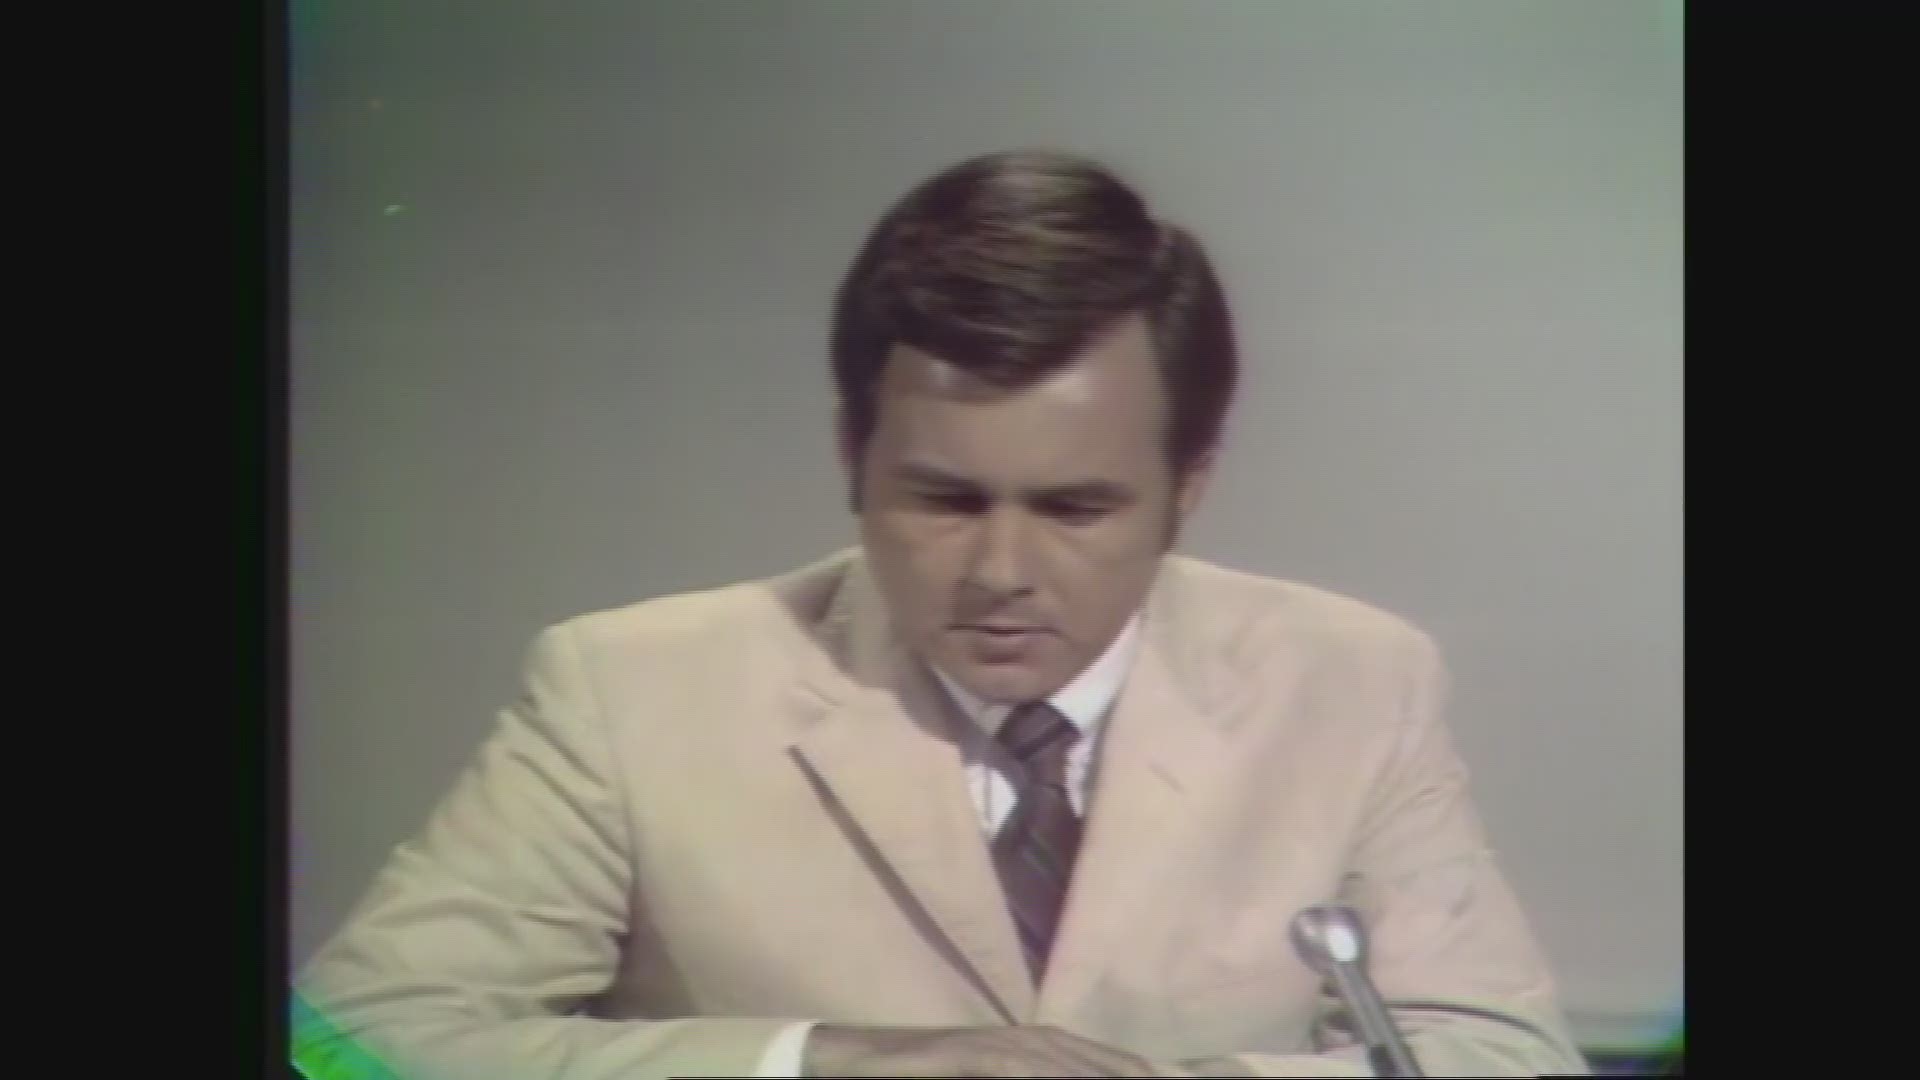 Former WWL-TV anchor Jim Metcalf reports from on the ground in Biloxi, after Hurricane Camille's landfall.